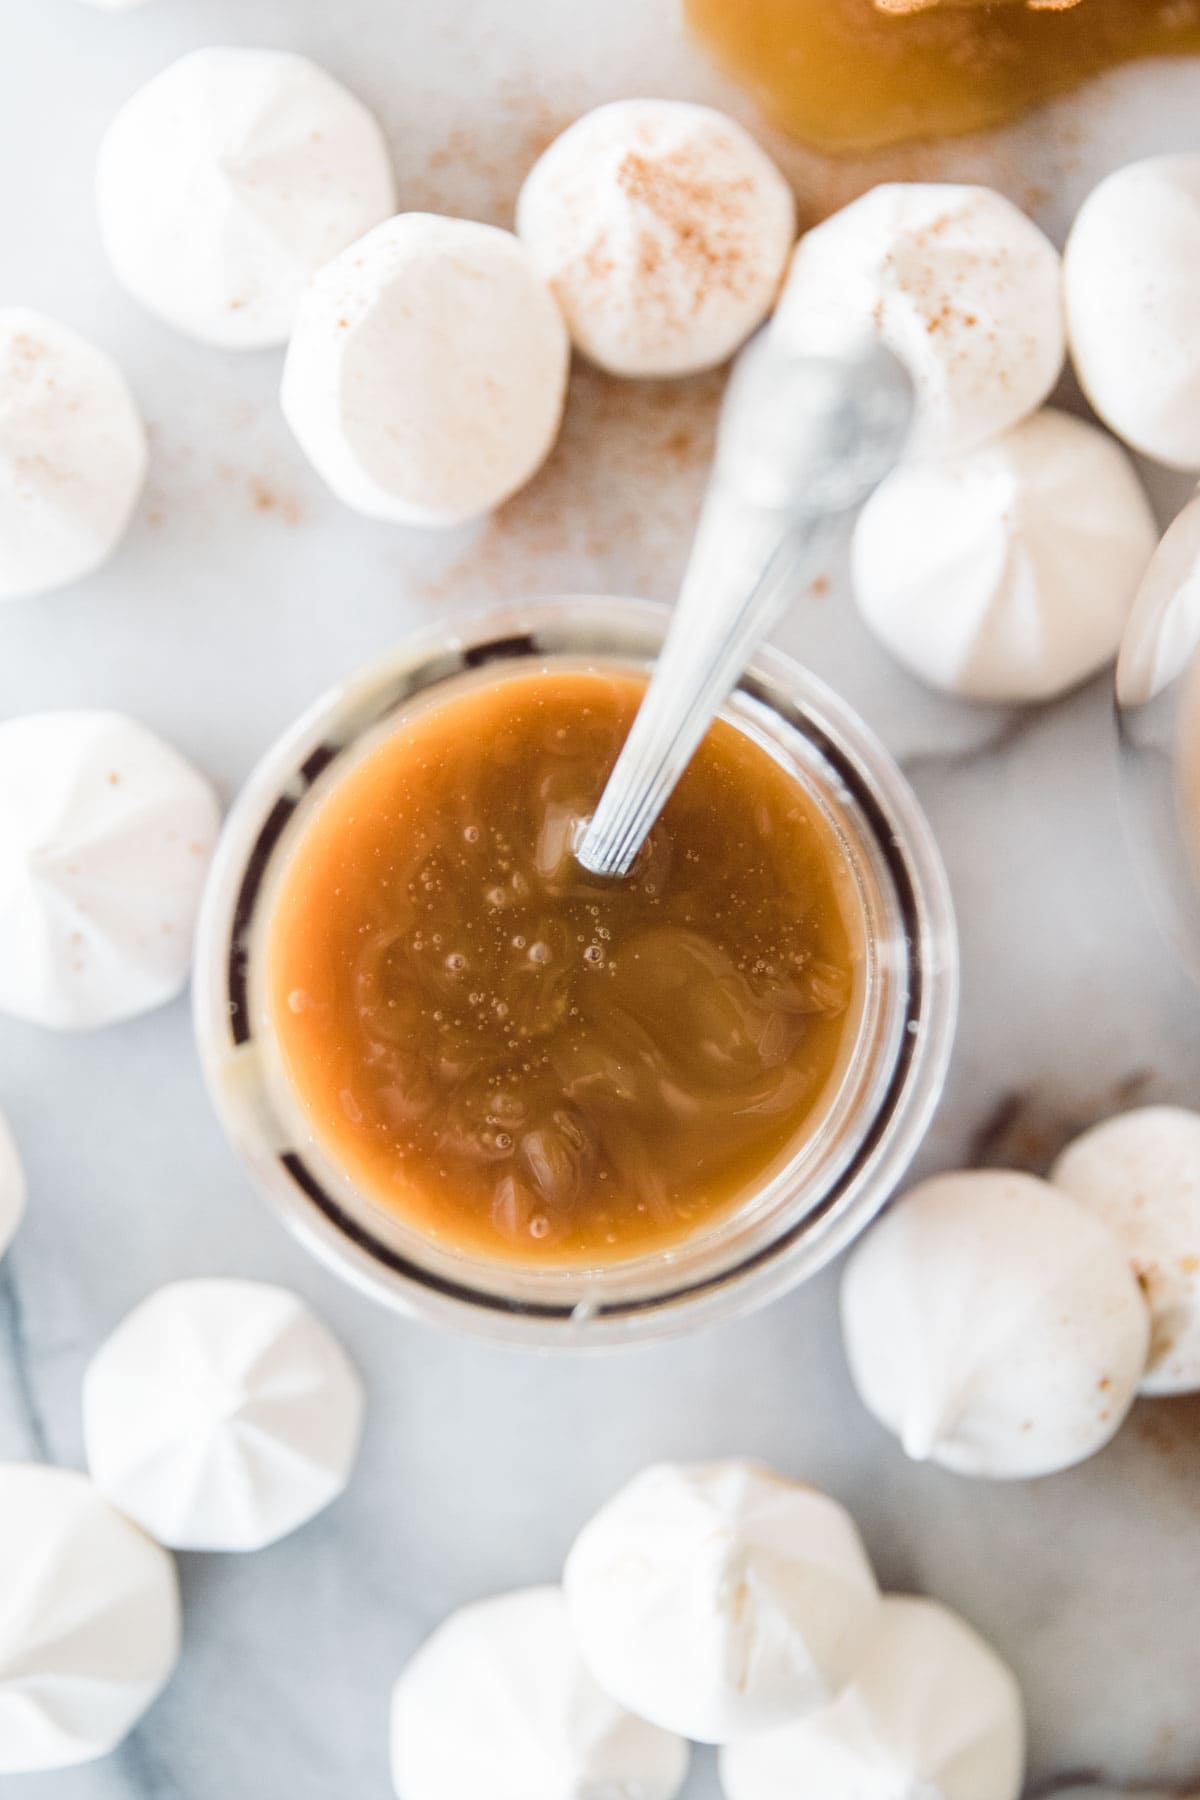 small glass with a spoon dipping into caramel sauce